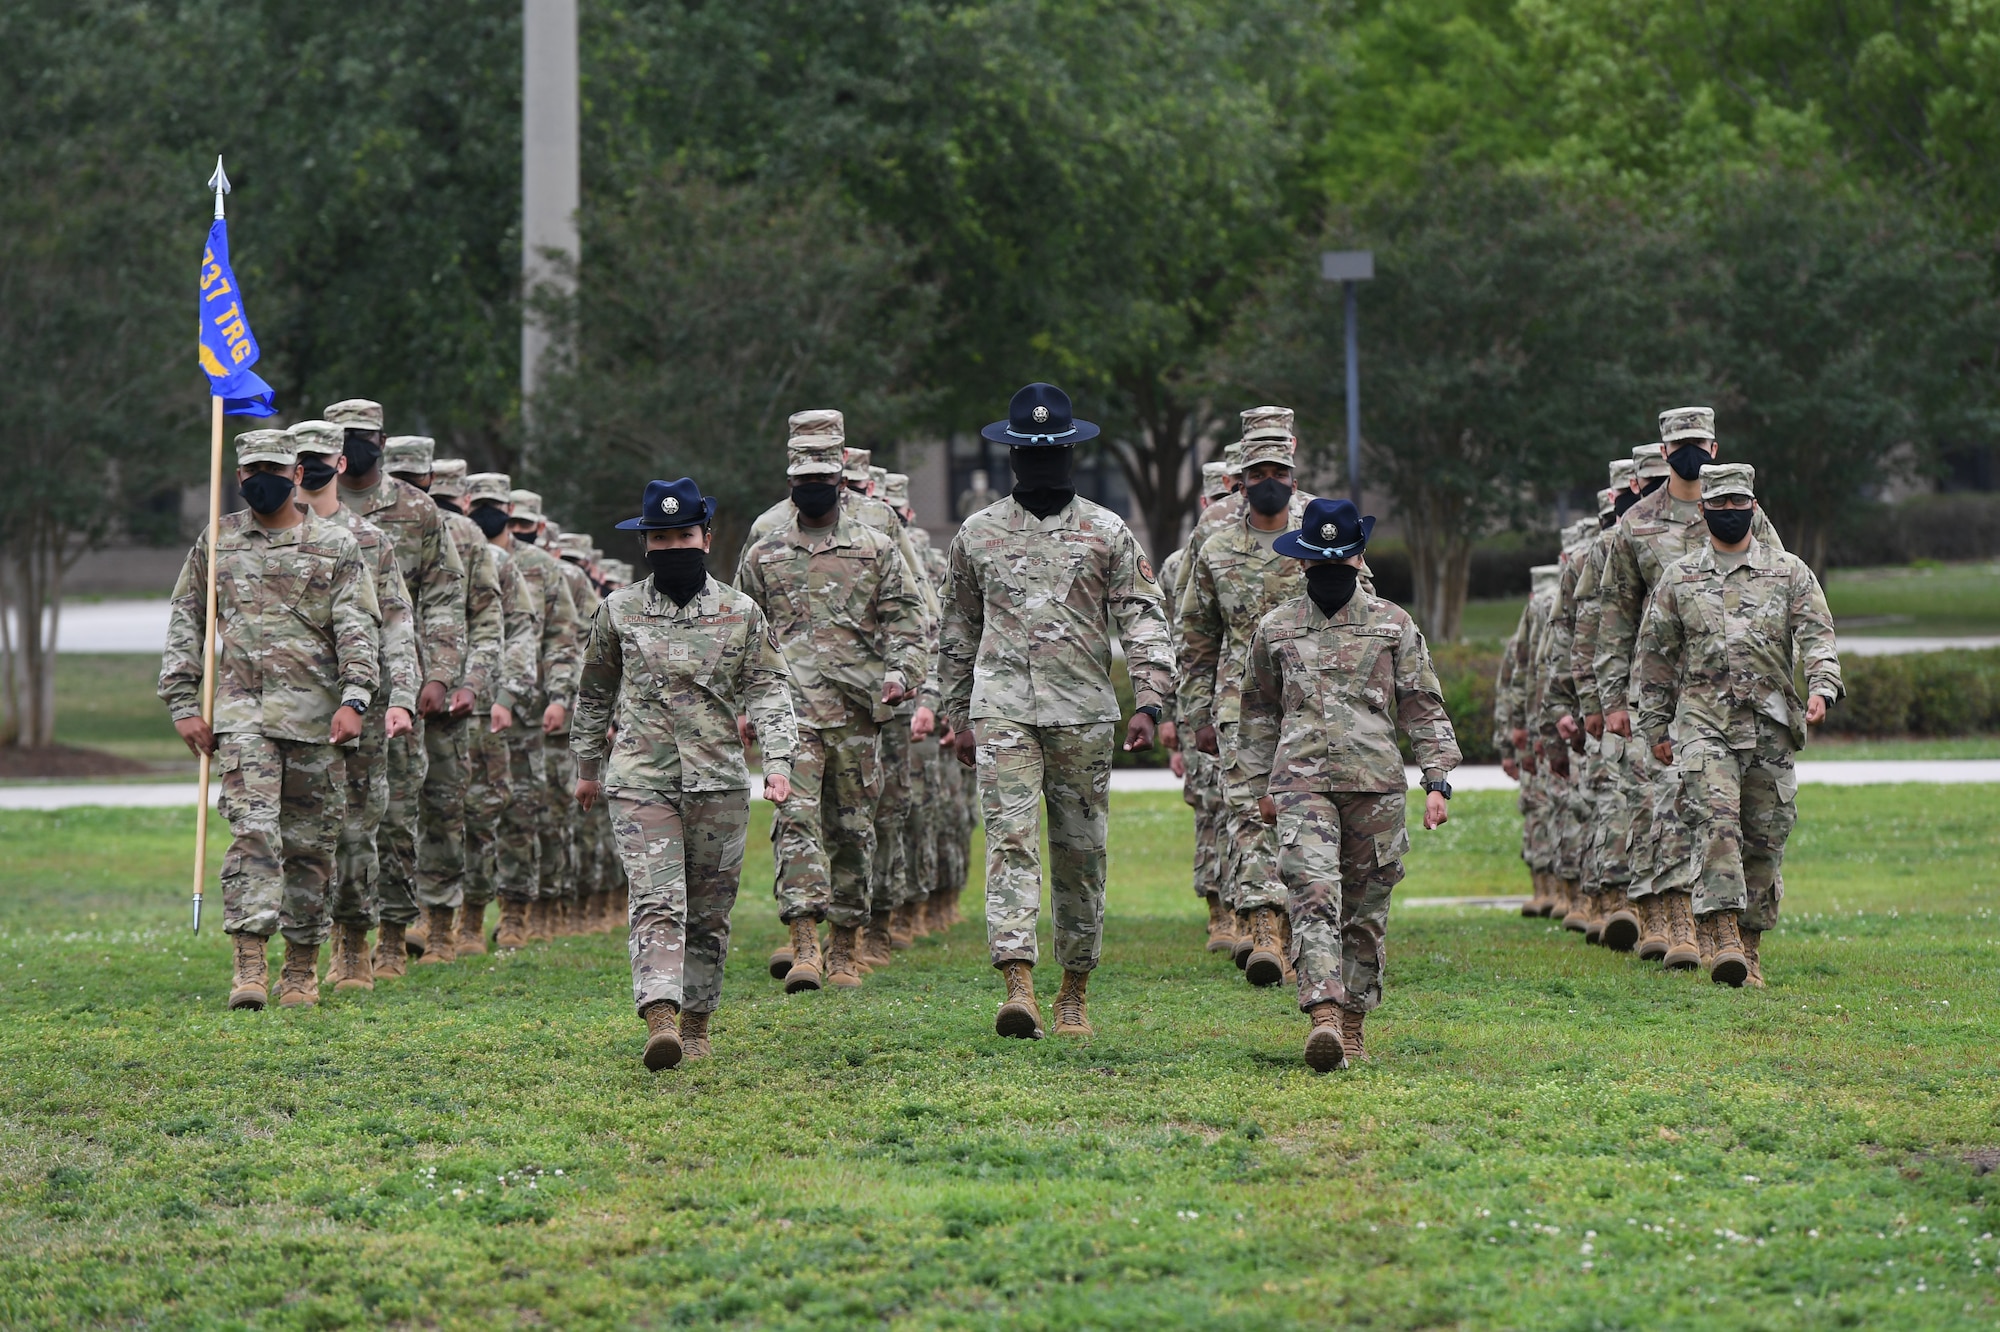 Military training instructors lead graduating Airmen onto the drill pad during the basic military training graduation ceremony at Keesler Air Force Base, Mississippi, May 15, 2020. Nearly 60 Airmen from the 37th Training Wing Detachment 5 completed the six-week basic military training course. Due to safety concerns stemming from COVID-19, the Air Force sent new recruits to Keesler to demonstrate a proof of concept to generate the force at multiple locations during contingencies. The flight was the first to graduate BMT at Keesler since 1968. (U.S. Air Force photo by Kemberly Groue)